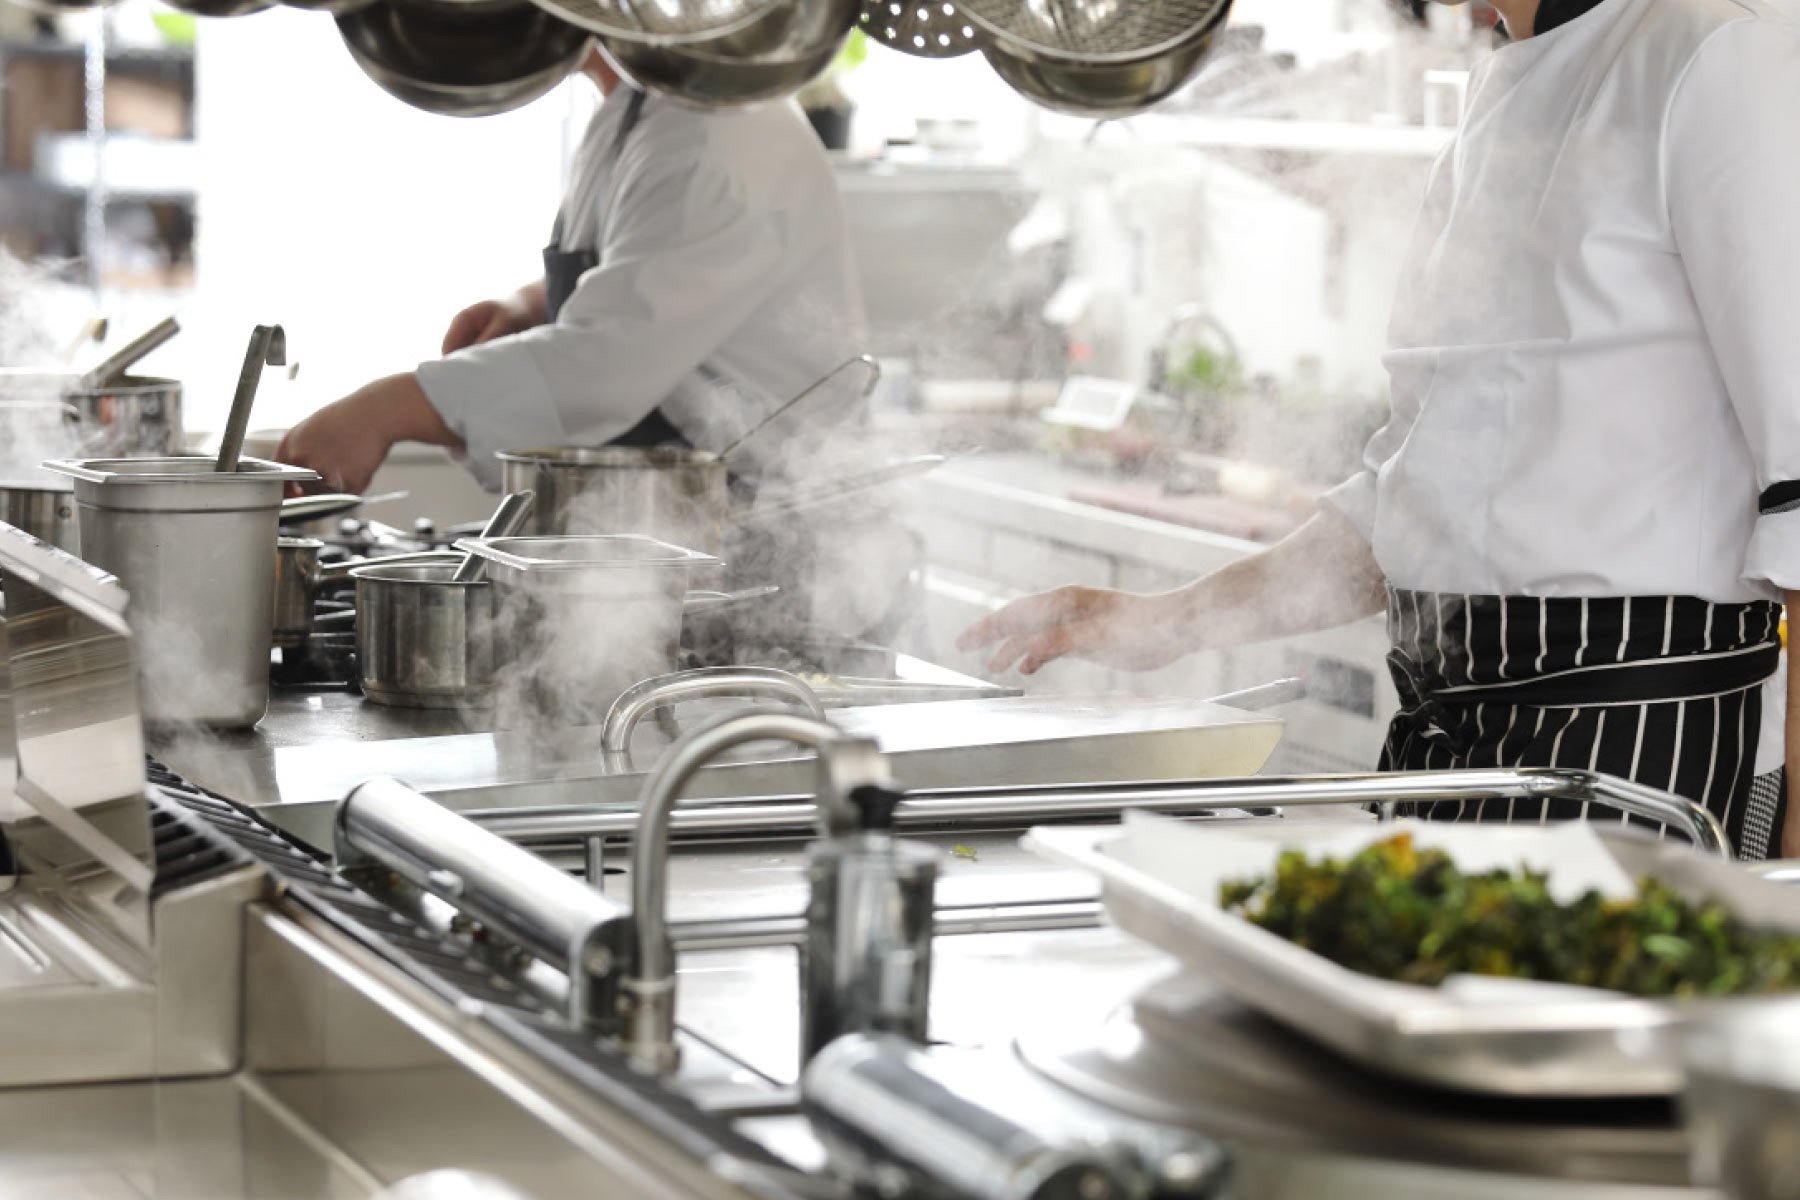 What Are the Requirements for a Commercial Kitchen?